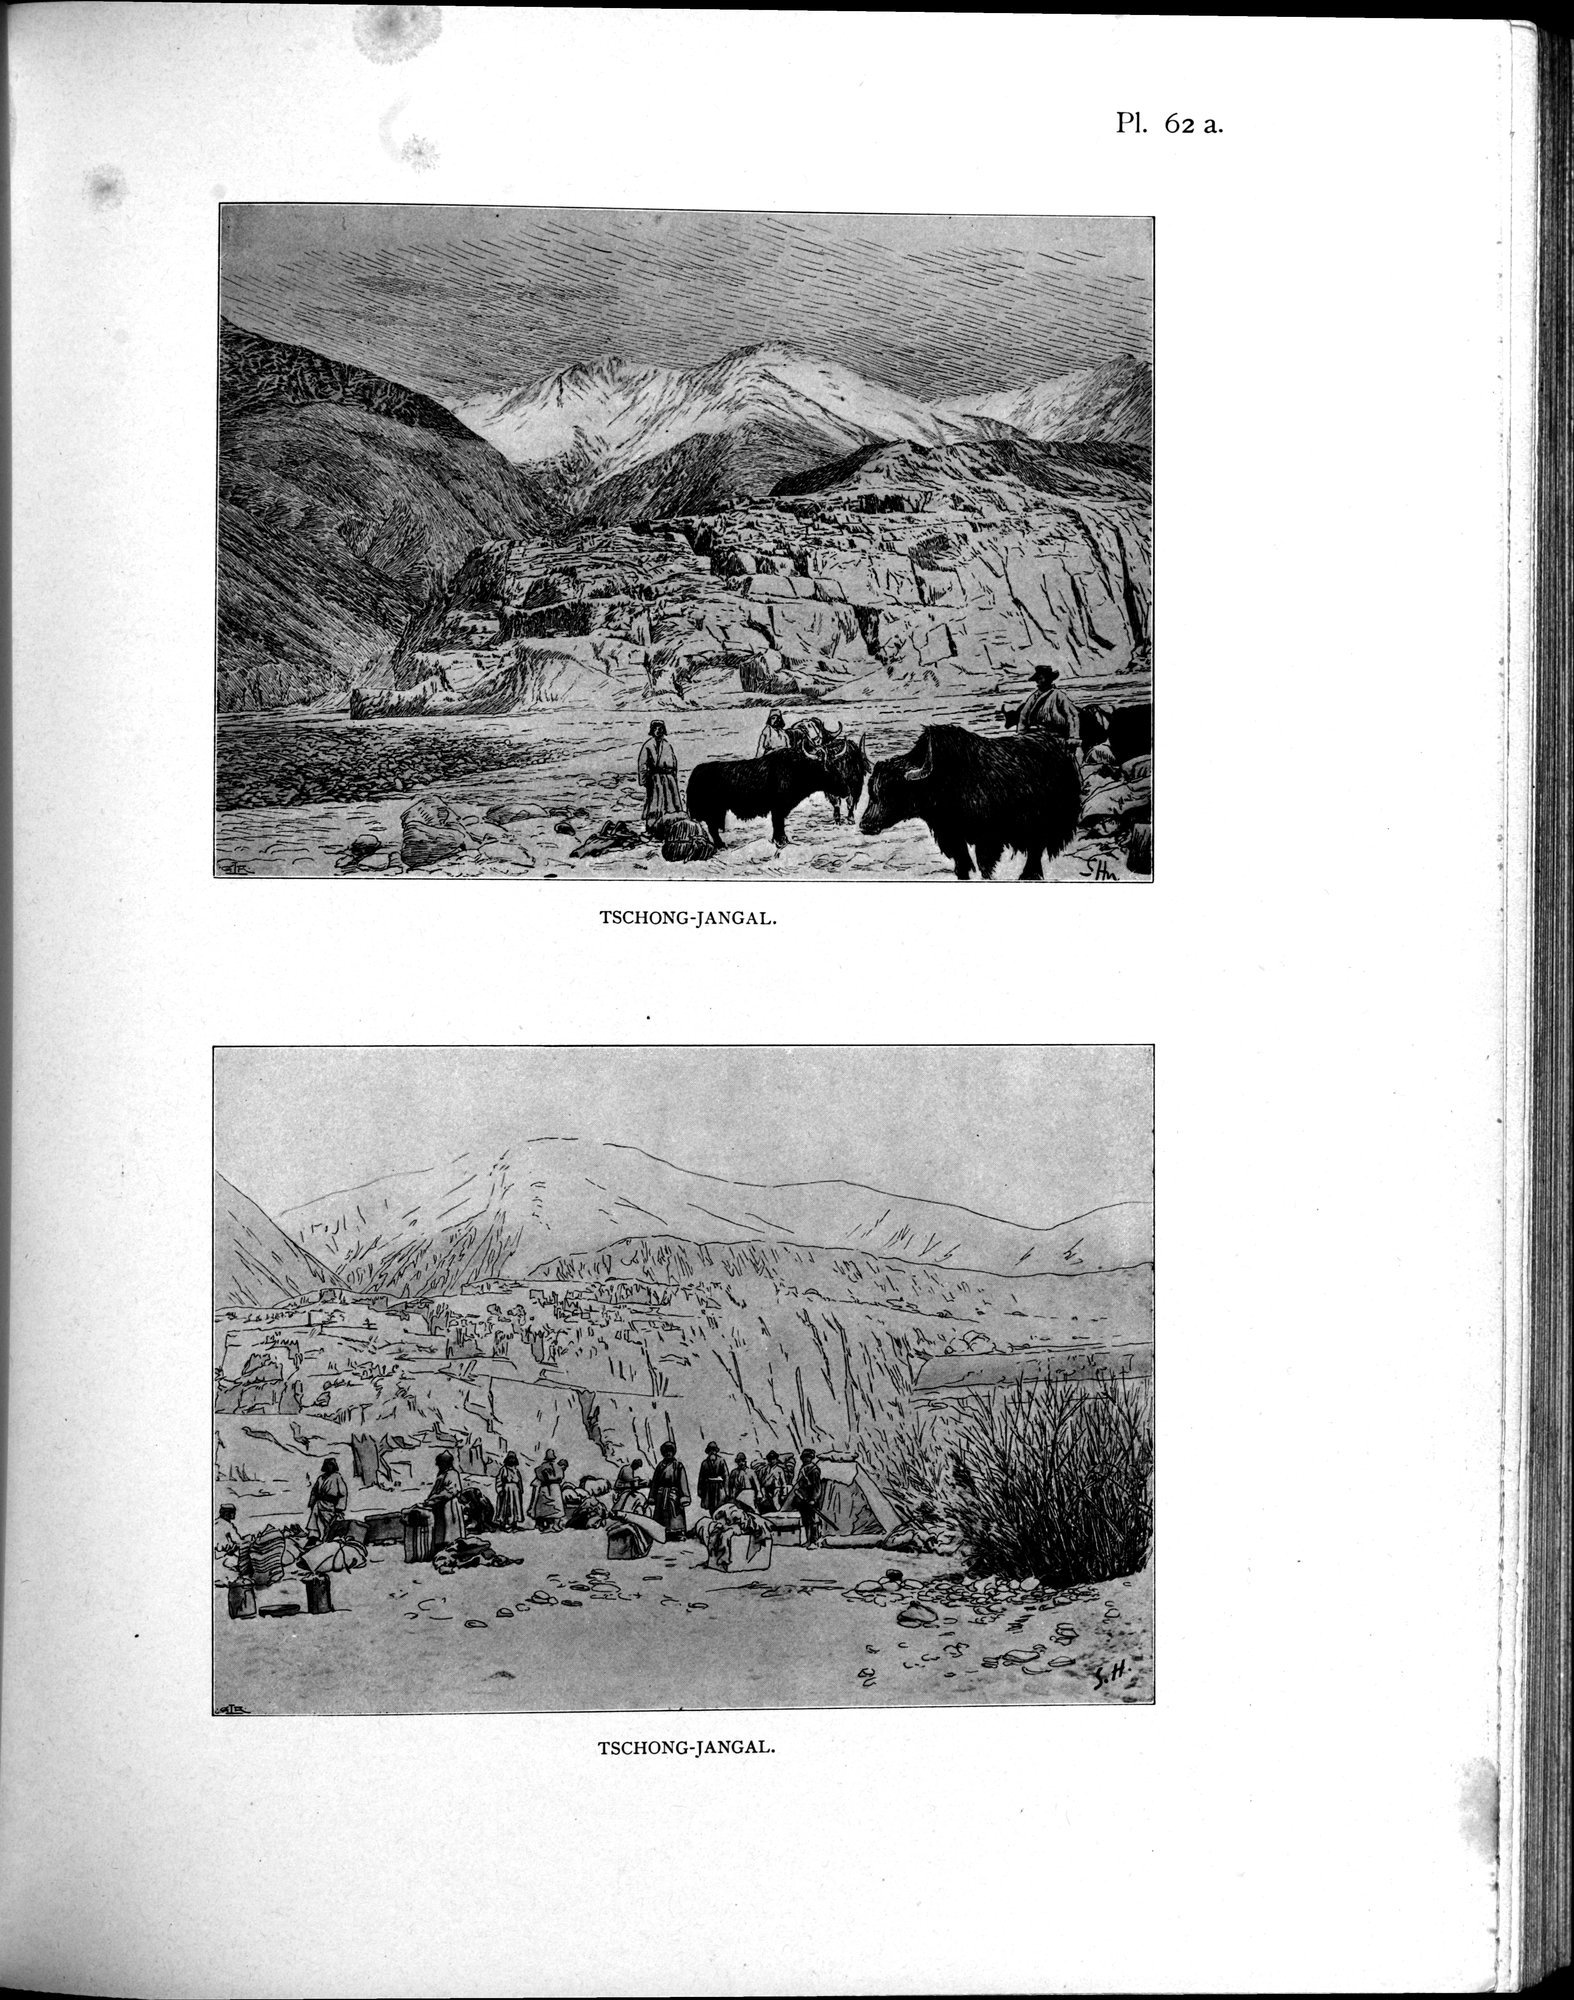 Scientific Results of a Journey in Central Asia, 1899-1902 : vol.4 / 561 ページ（白黒高解像度画像）